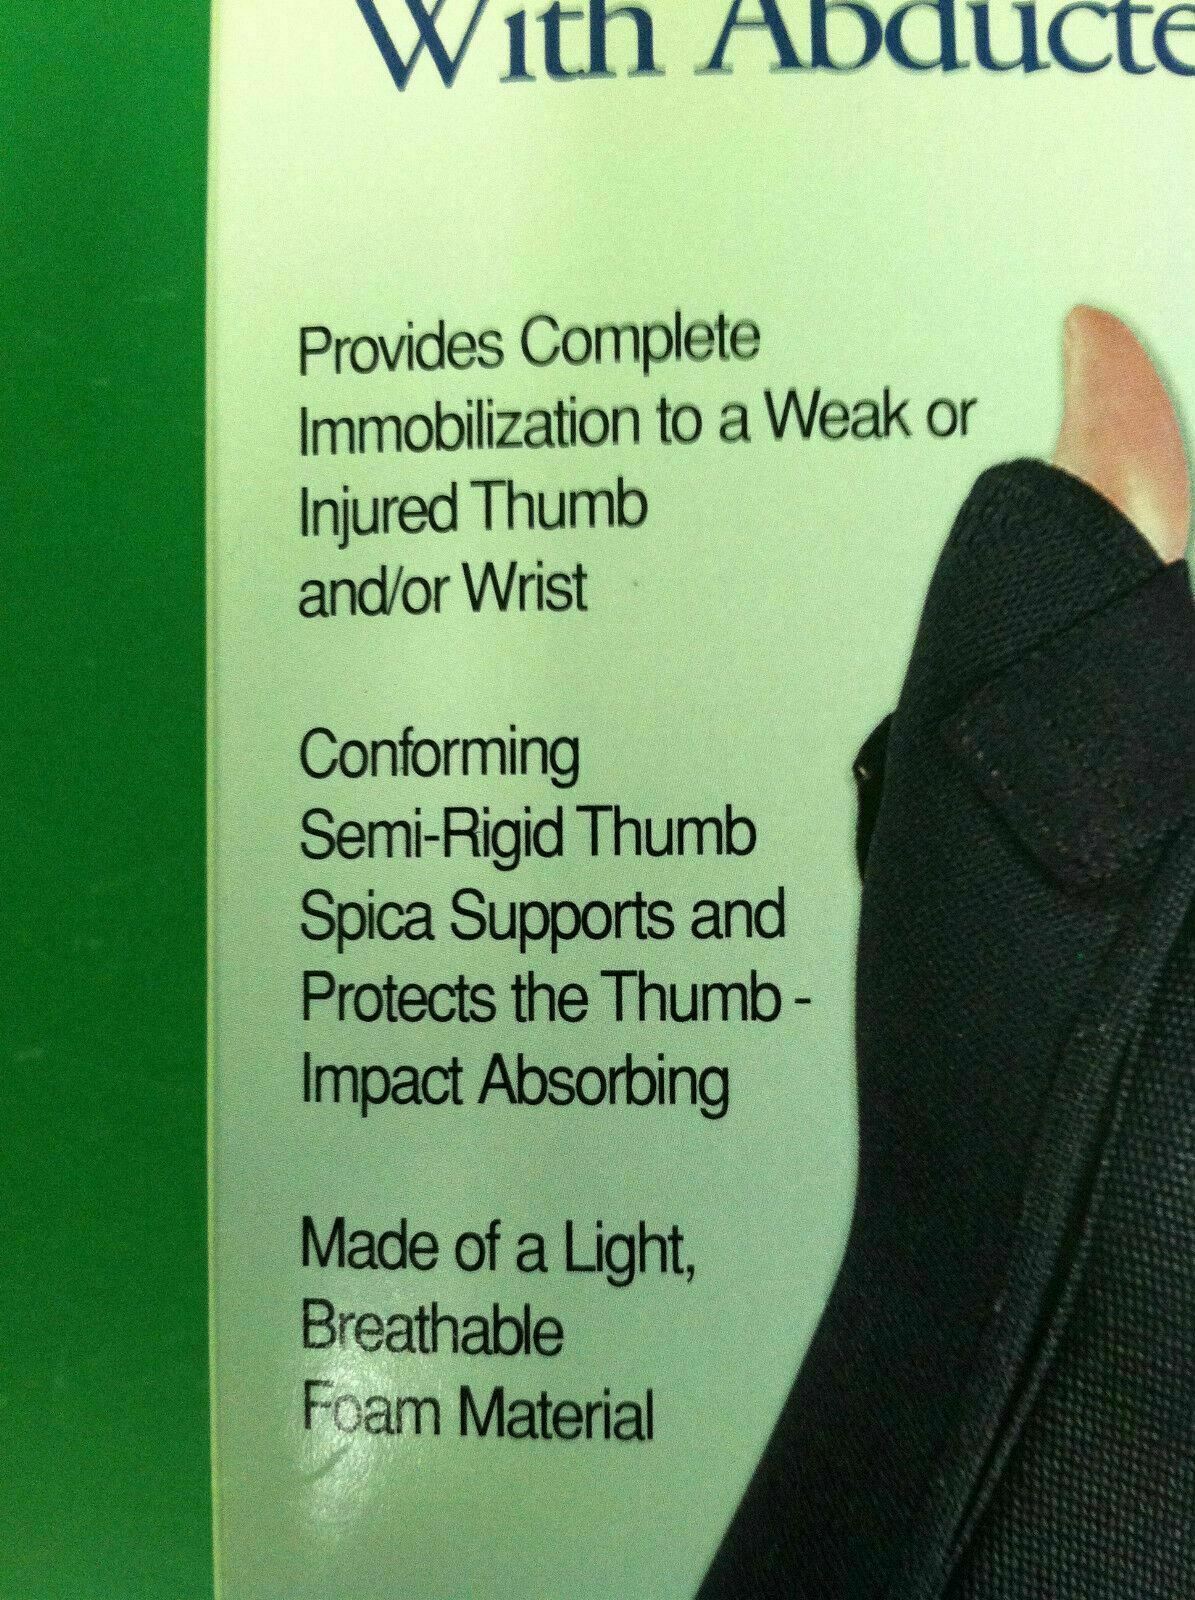 FLA Compression Formed Composite Wrist Splint With Abducted Thumb XL RIGHT #6933